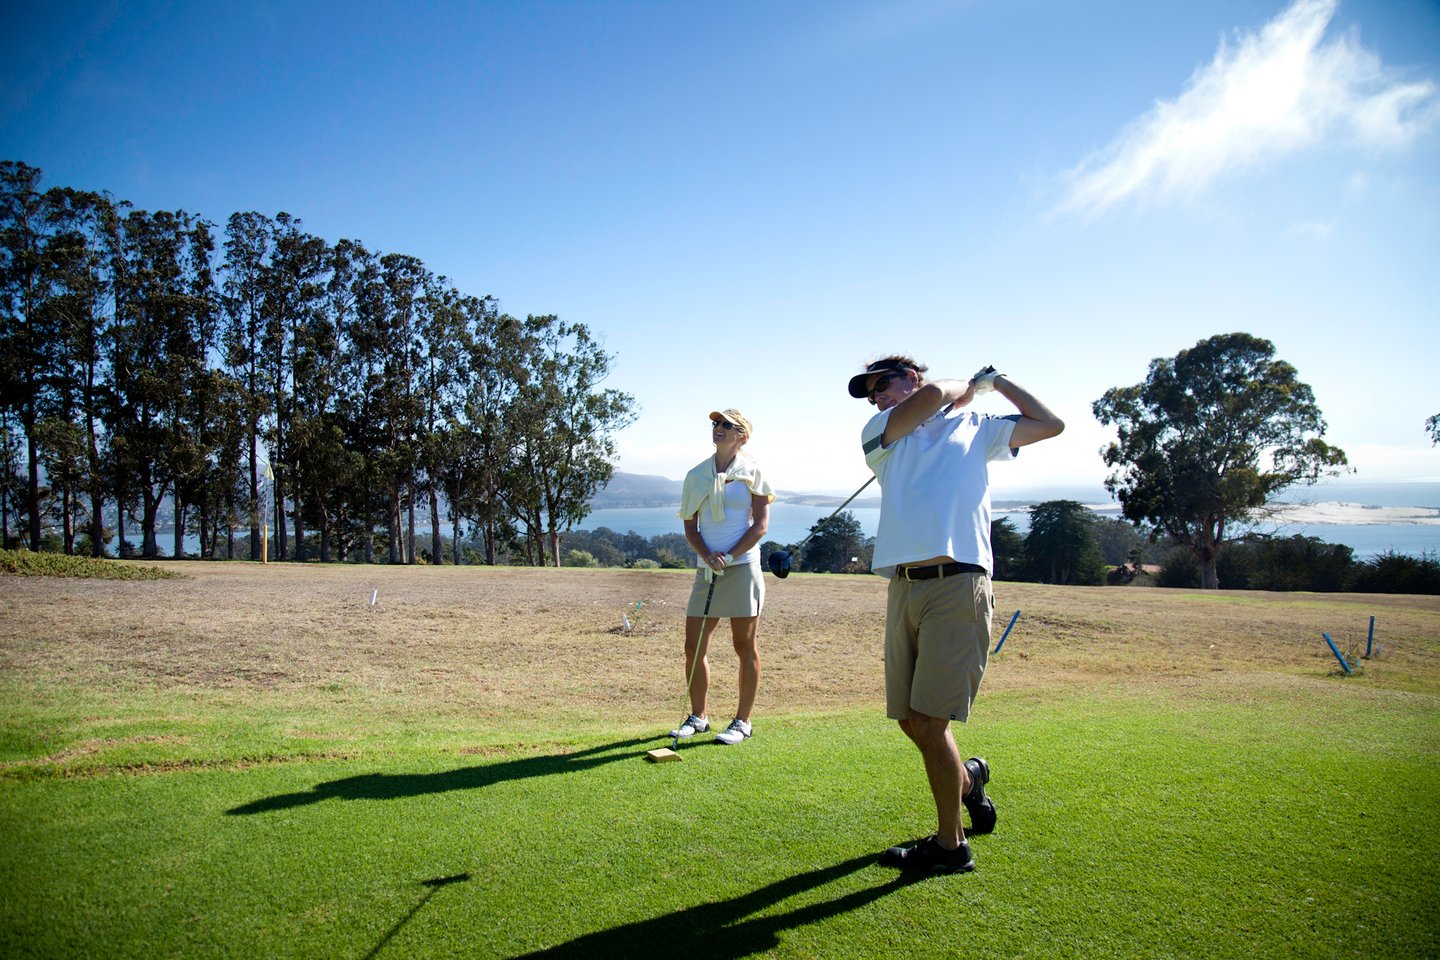 A golfer takes a swing on a course with a blue-sky background.